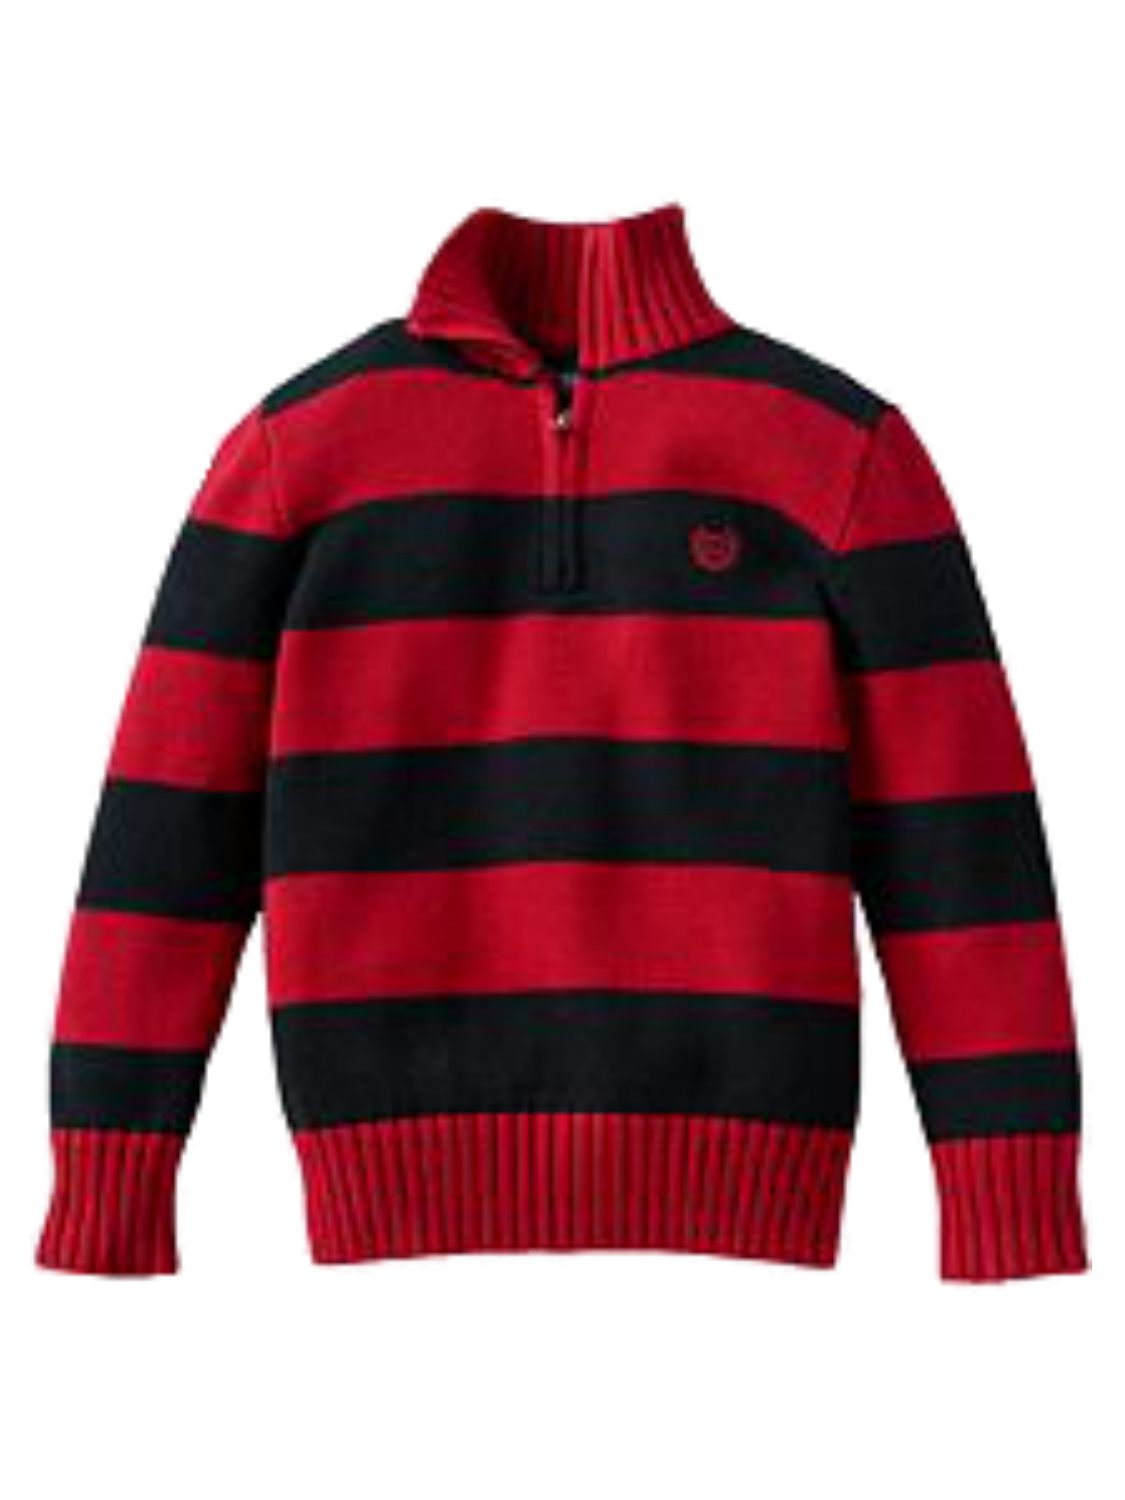 Chaps Toddler Little Boys Red Black Striped Zip Front Henley Knit Sweater